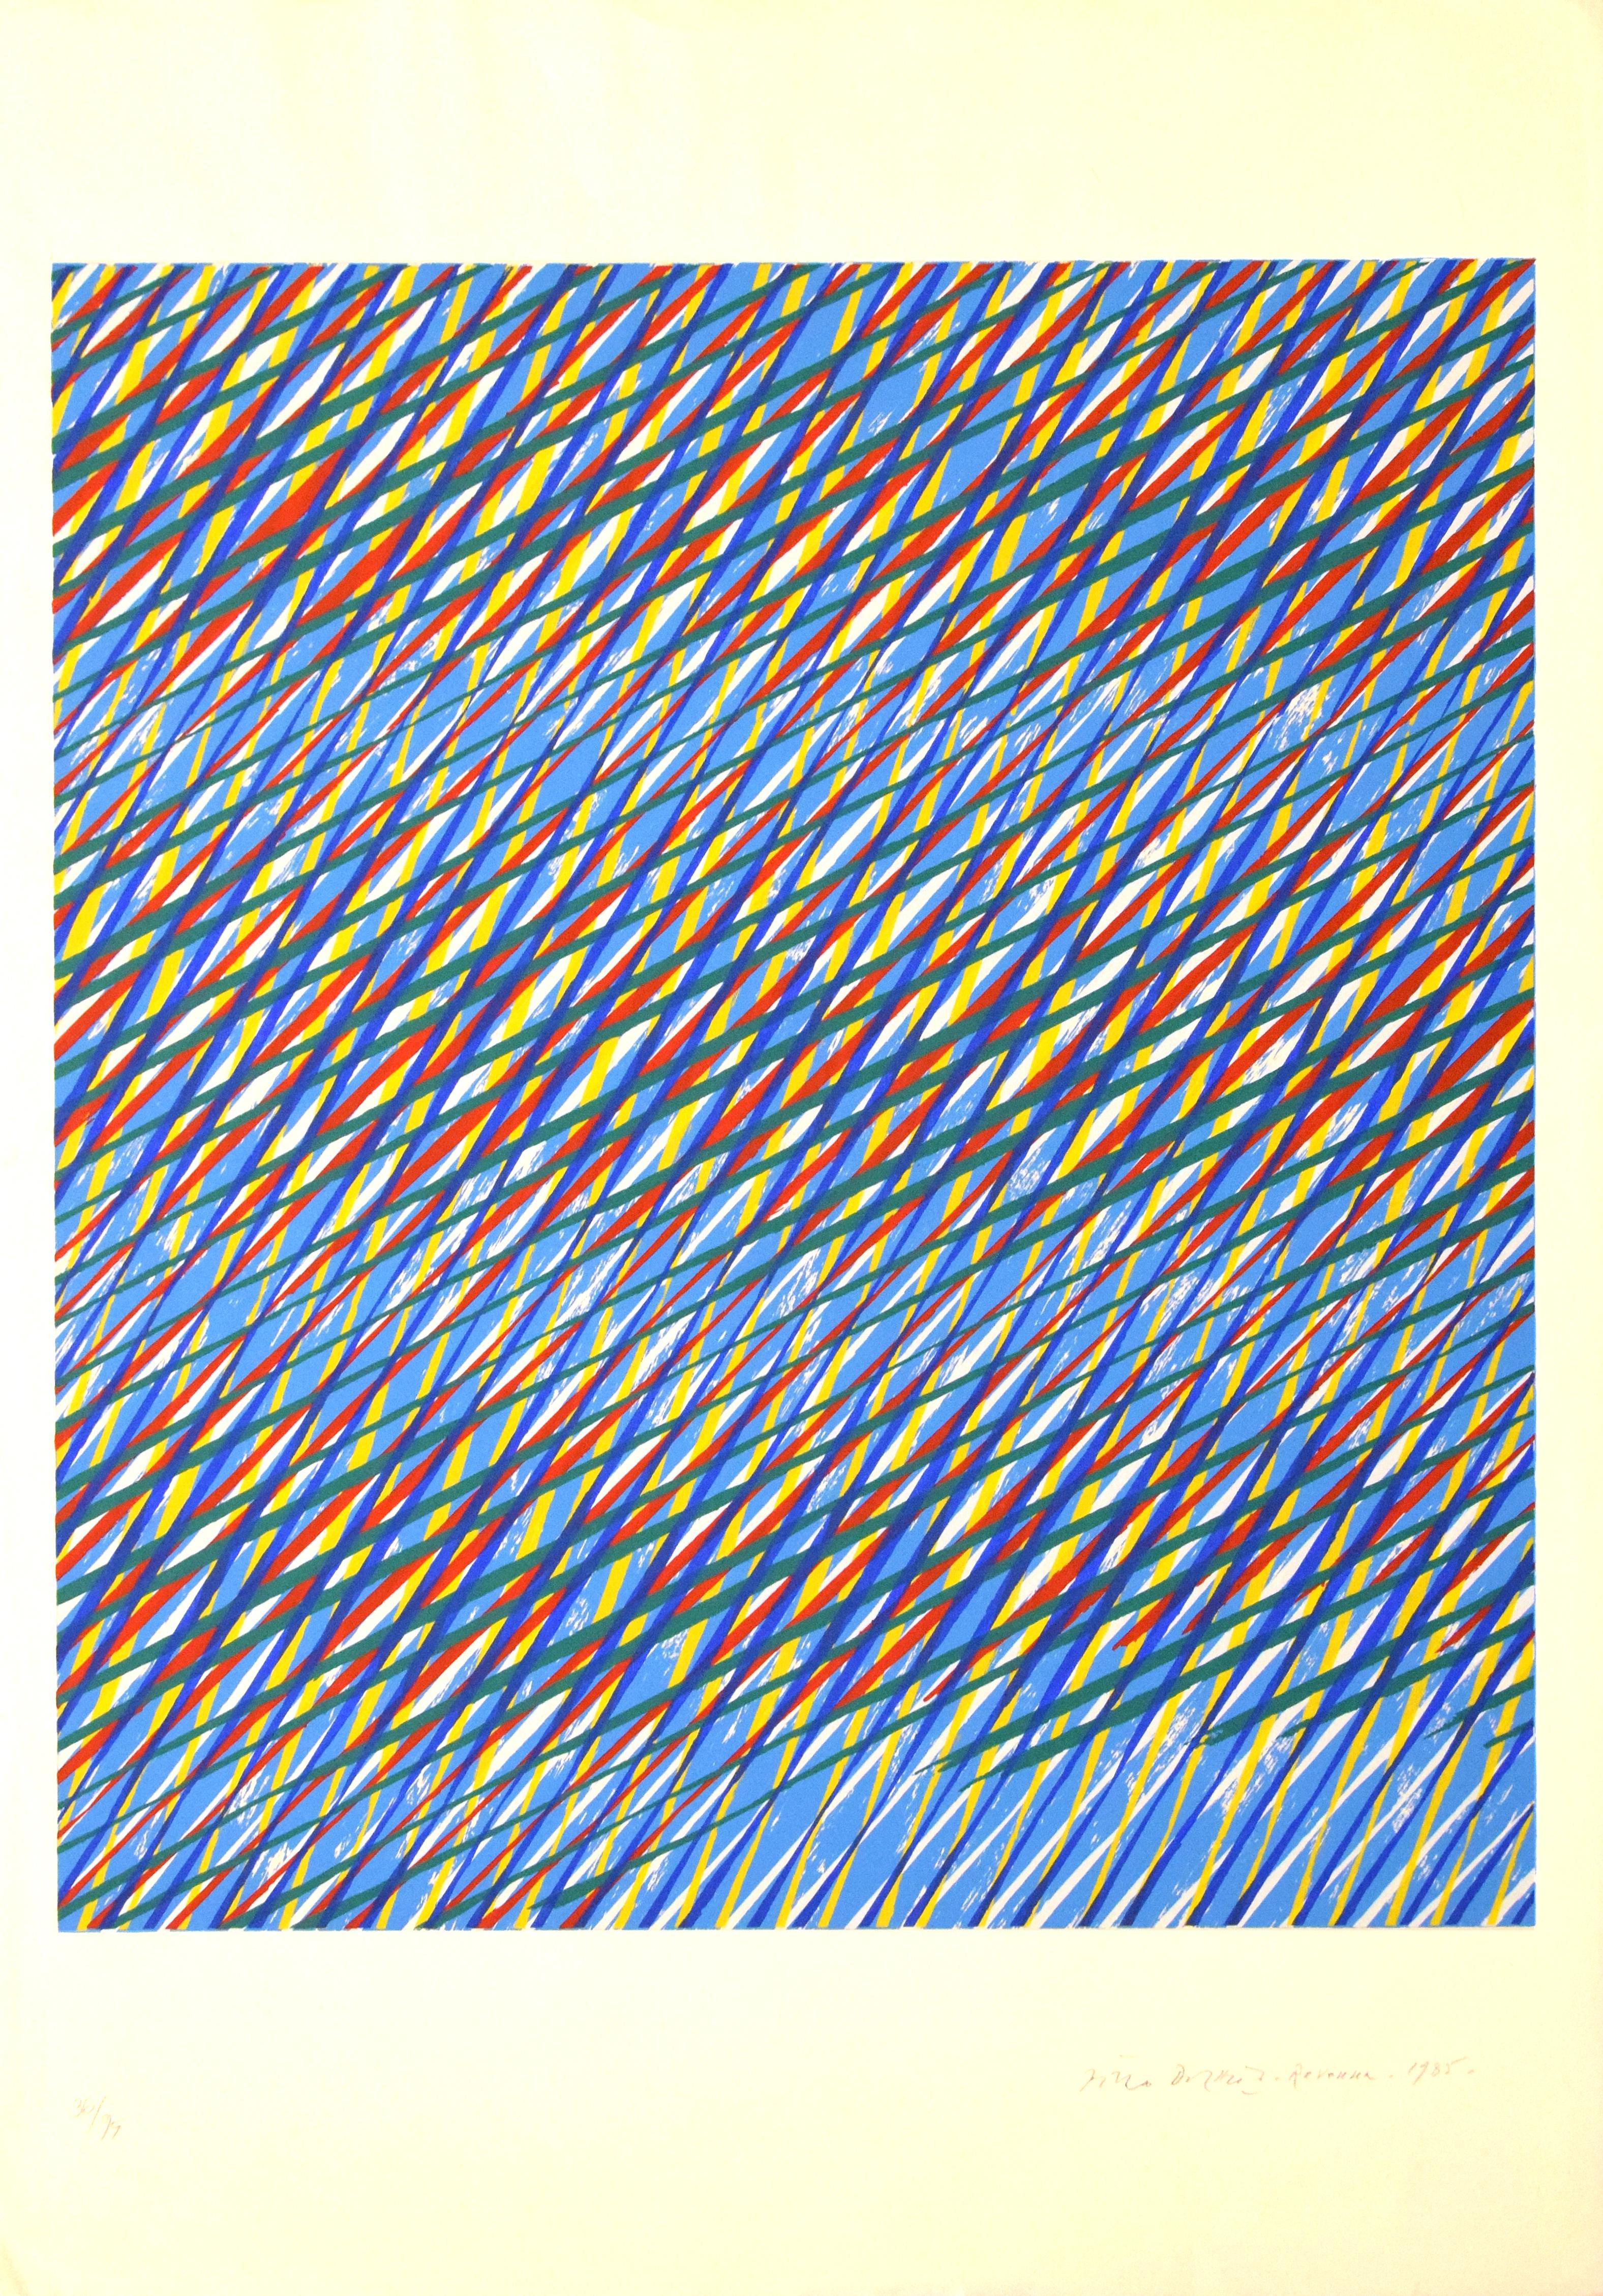 Crossing Lines is a joyful colored screen print realized in 1985 by Piero Dorazio.

Signed, dated, and numbered in pencil on the lower margin "Piero Dorazio, Ravenna, 1985". Edition of 95 prints. 
In excellent conditions, except for some little rips